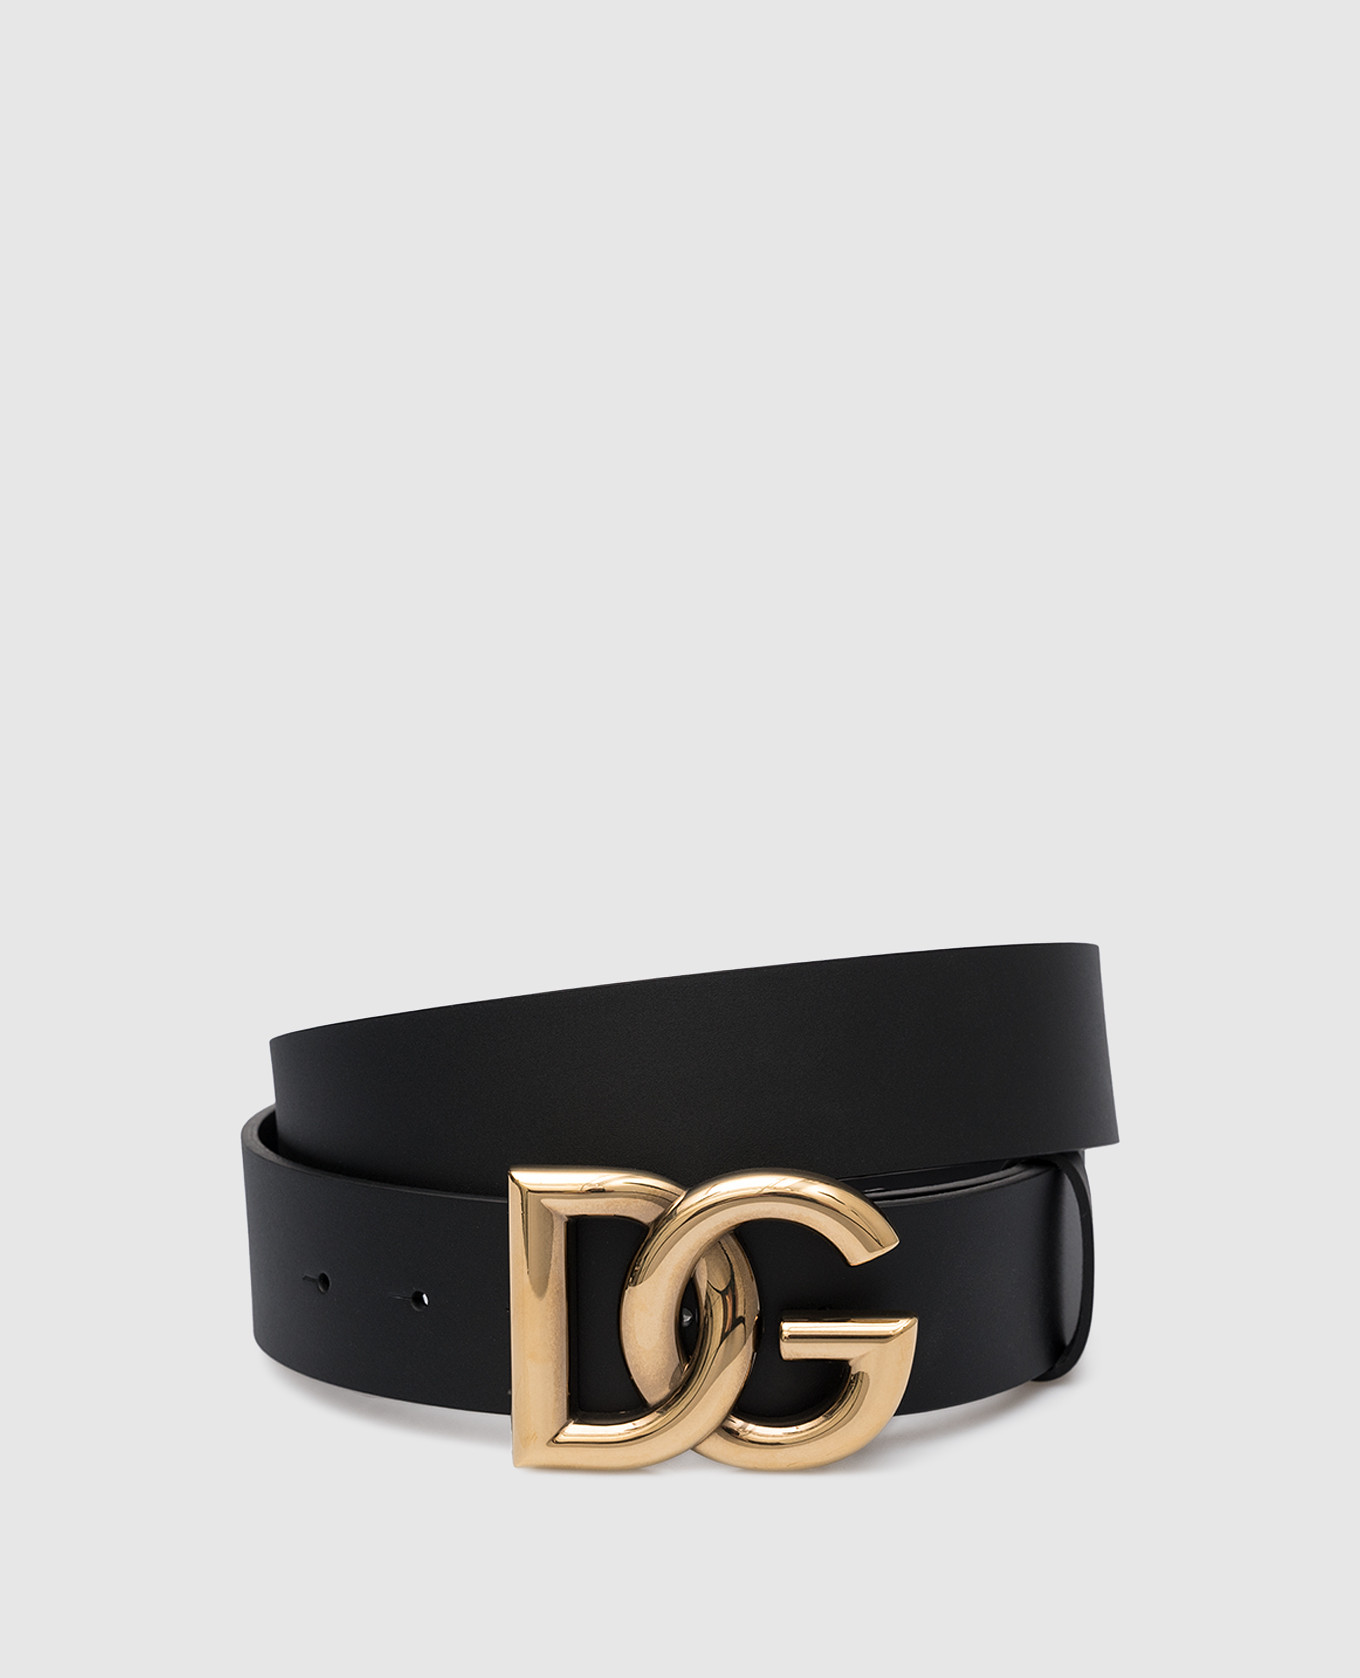 Black leather strap with D&G logo